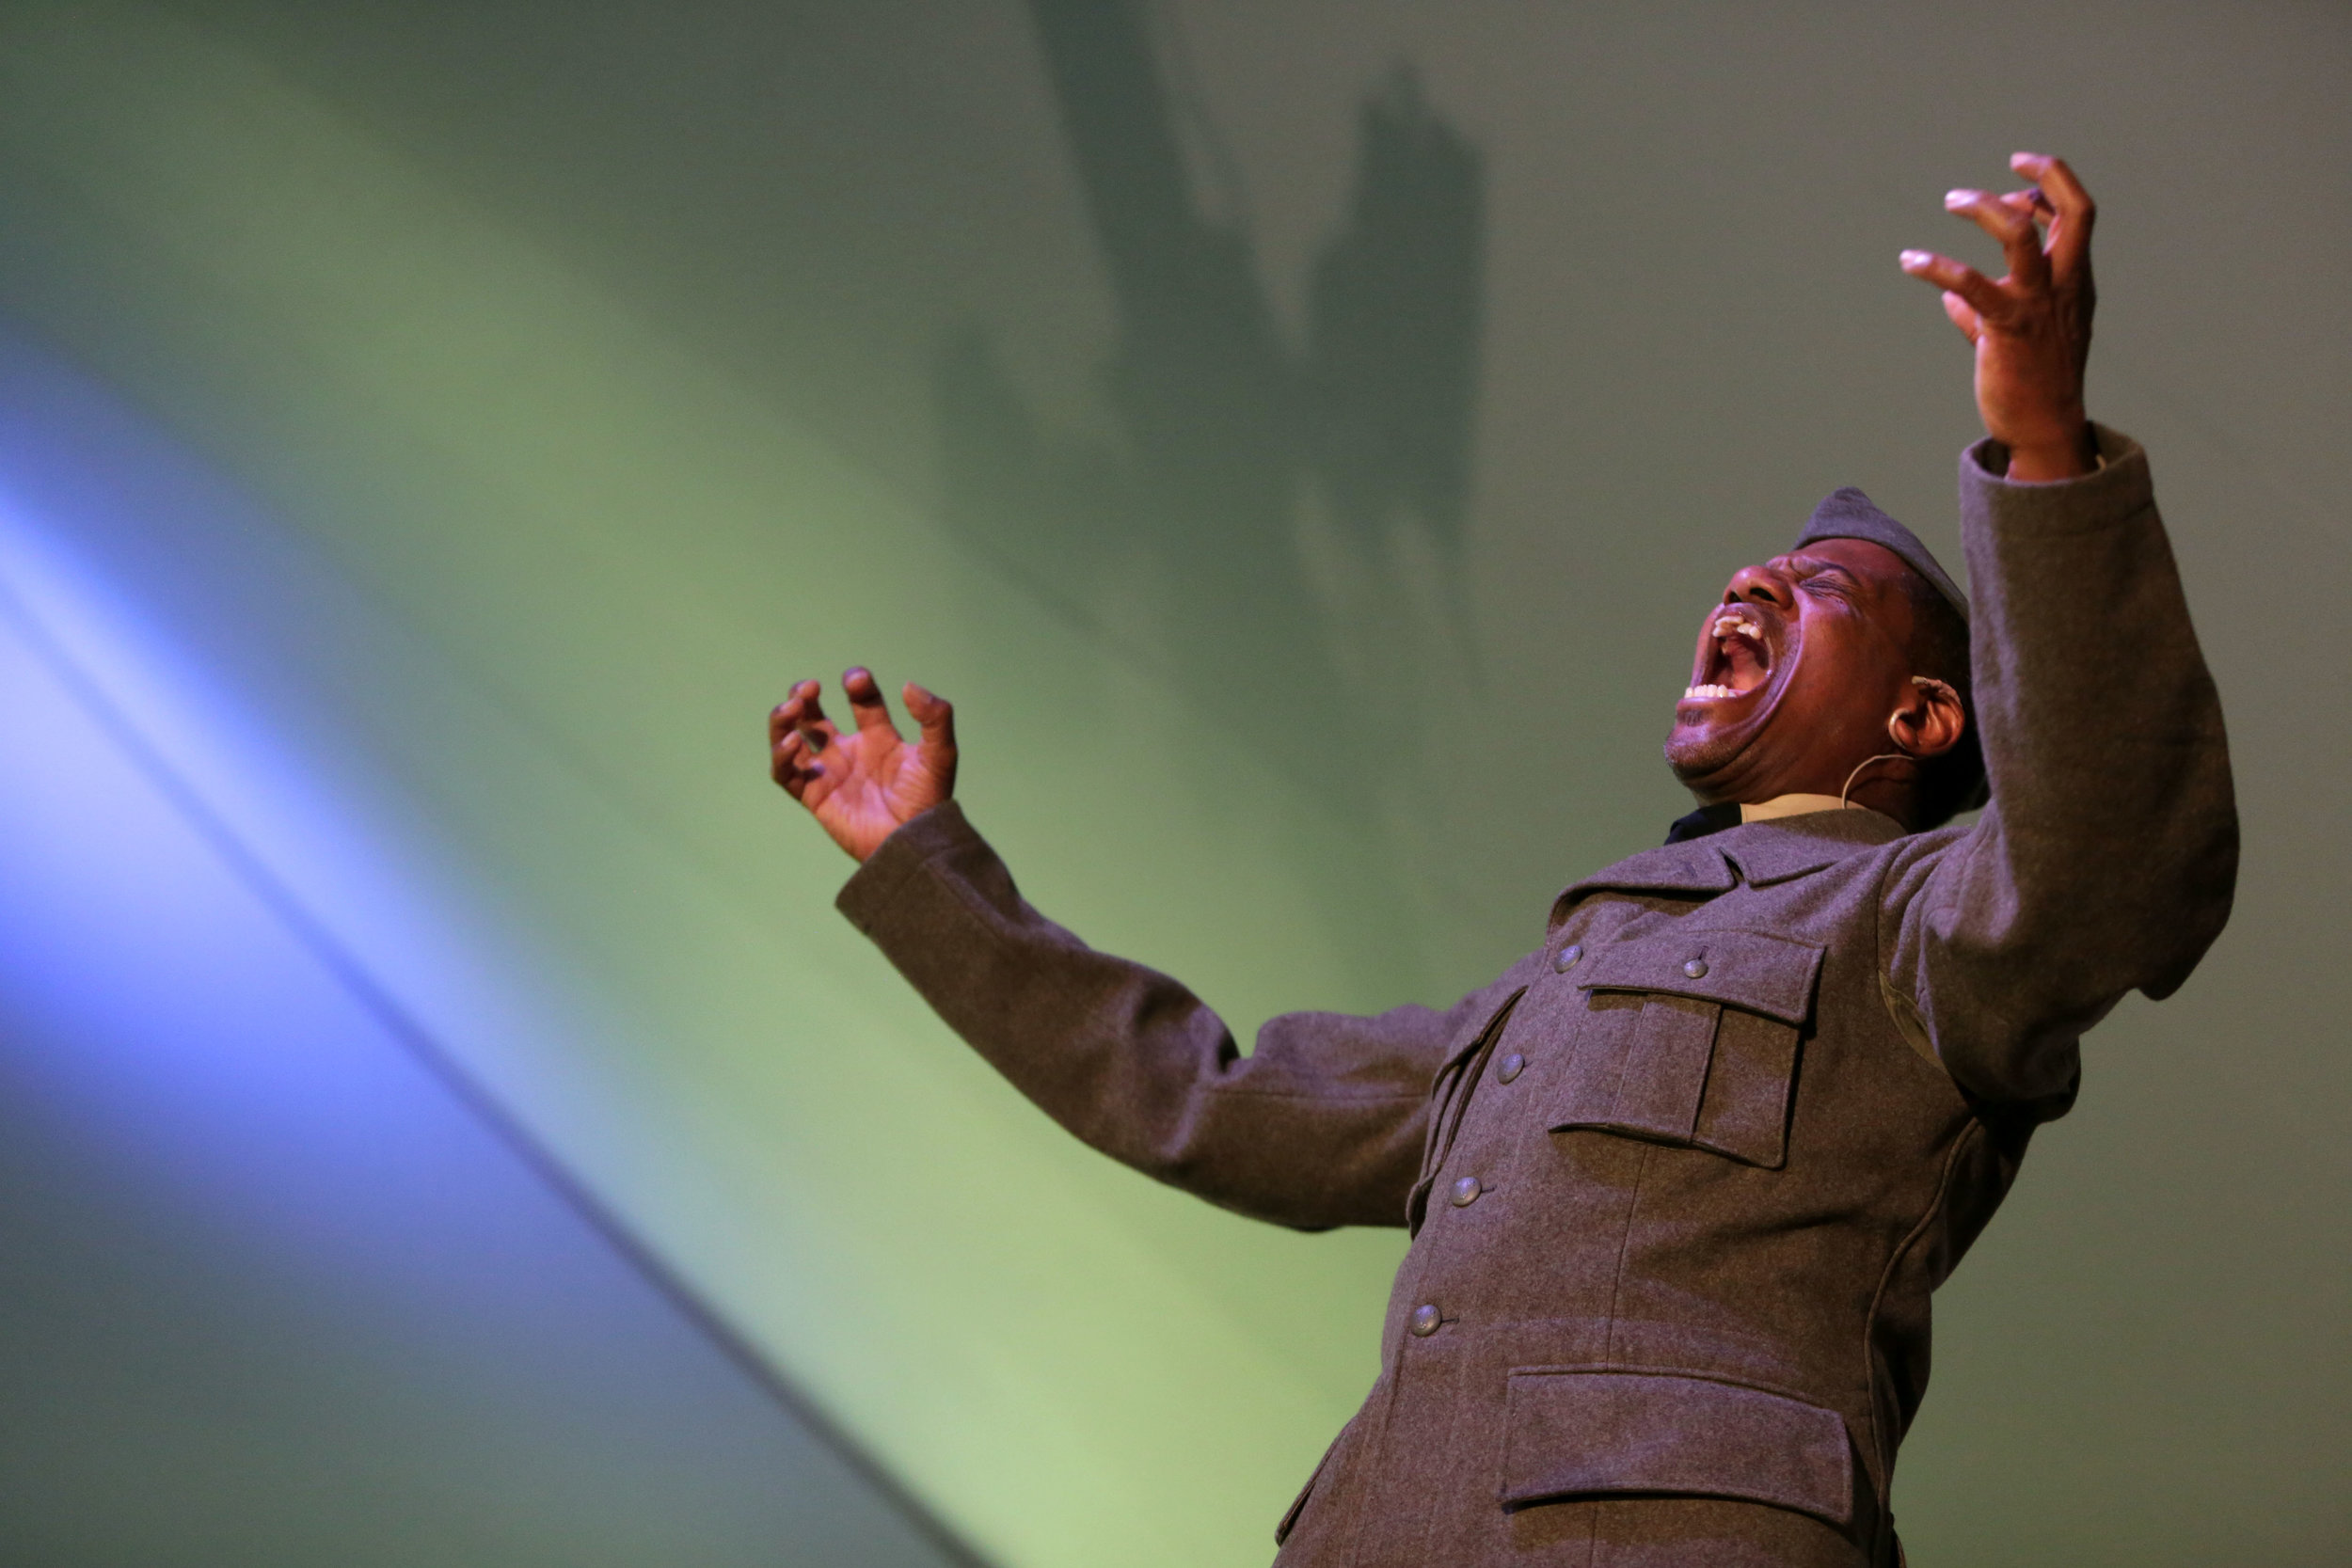  Keith Henley performs on stage as Sgt. Henry Johnson at the High Plains Chautauqua, Echoes of World War 1 event,&nbsp; at Aims Community College in Greeley, July 2017. Sgt. Henry Johnson was a heroic black soldier who was awarded the Congressional M